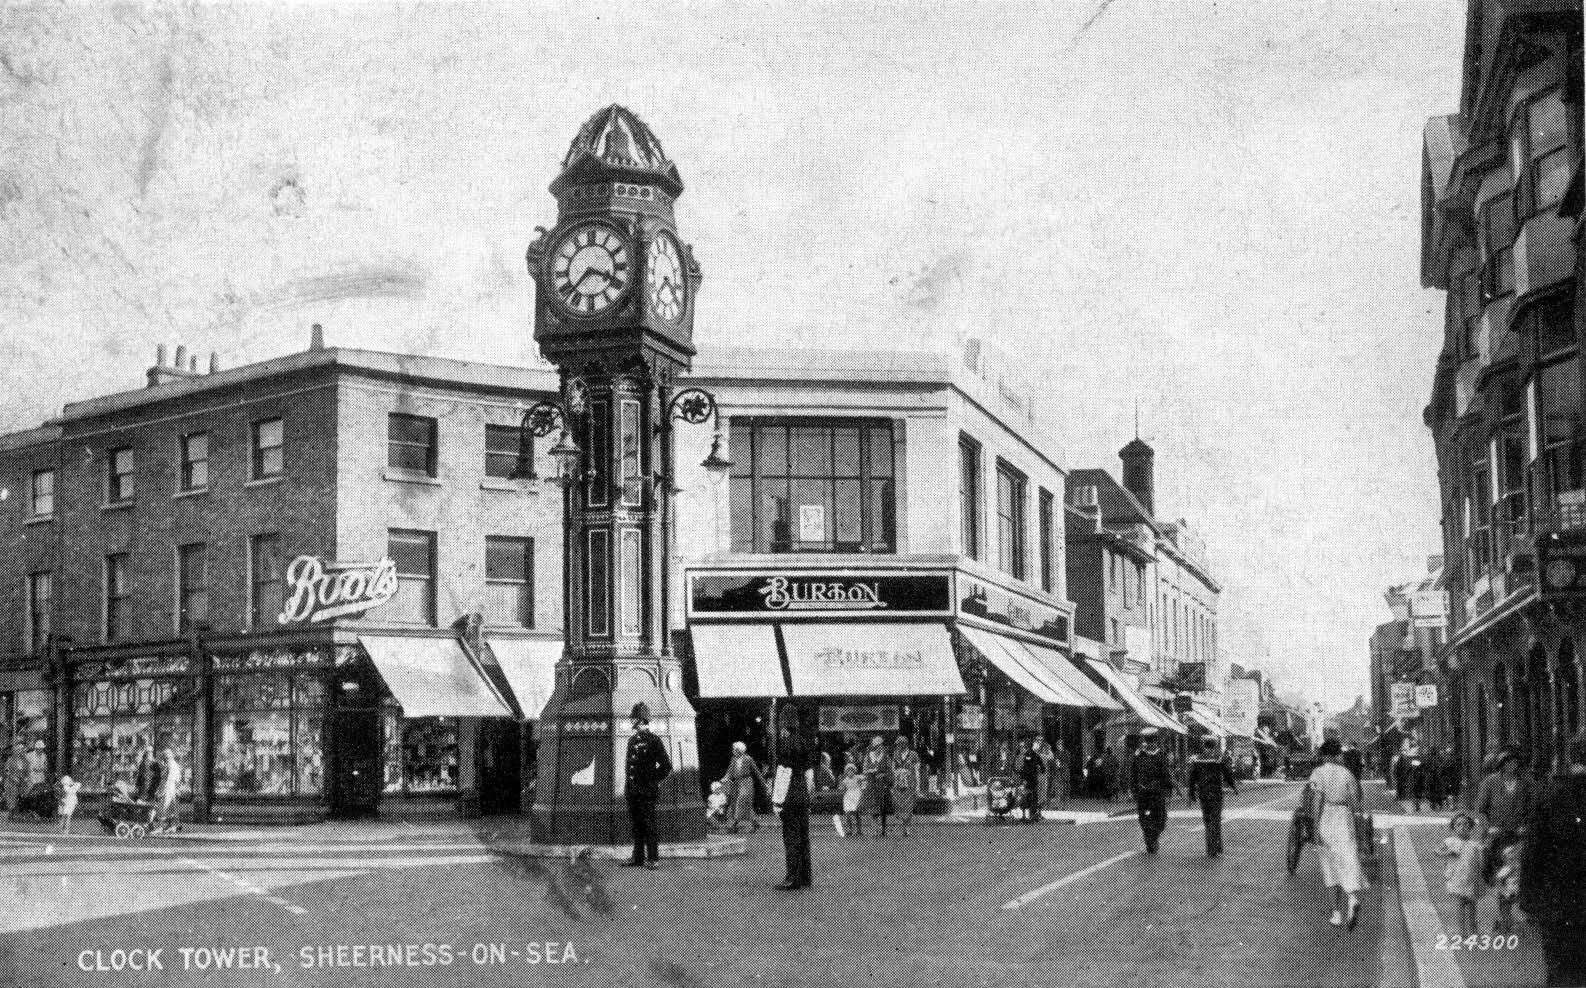 Postcard of Sheerness clock tower with an old-fashioned bobby and when Burton was in town. Provided by Chris Reed